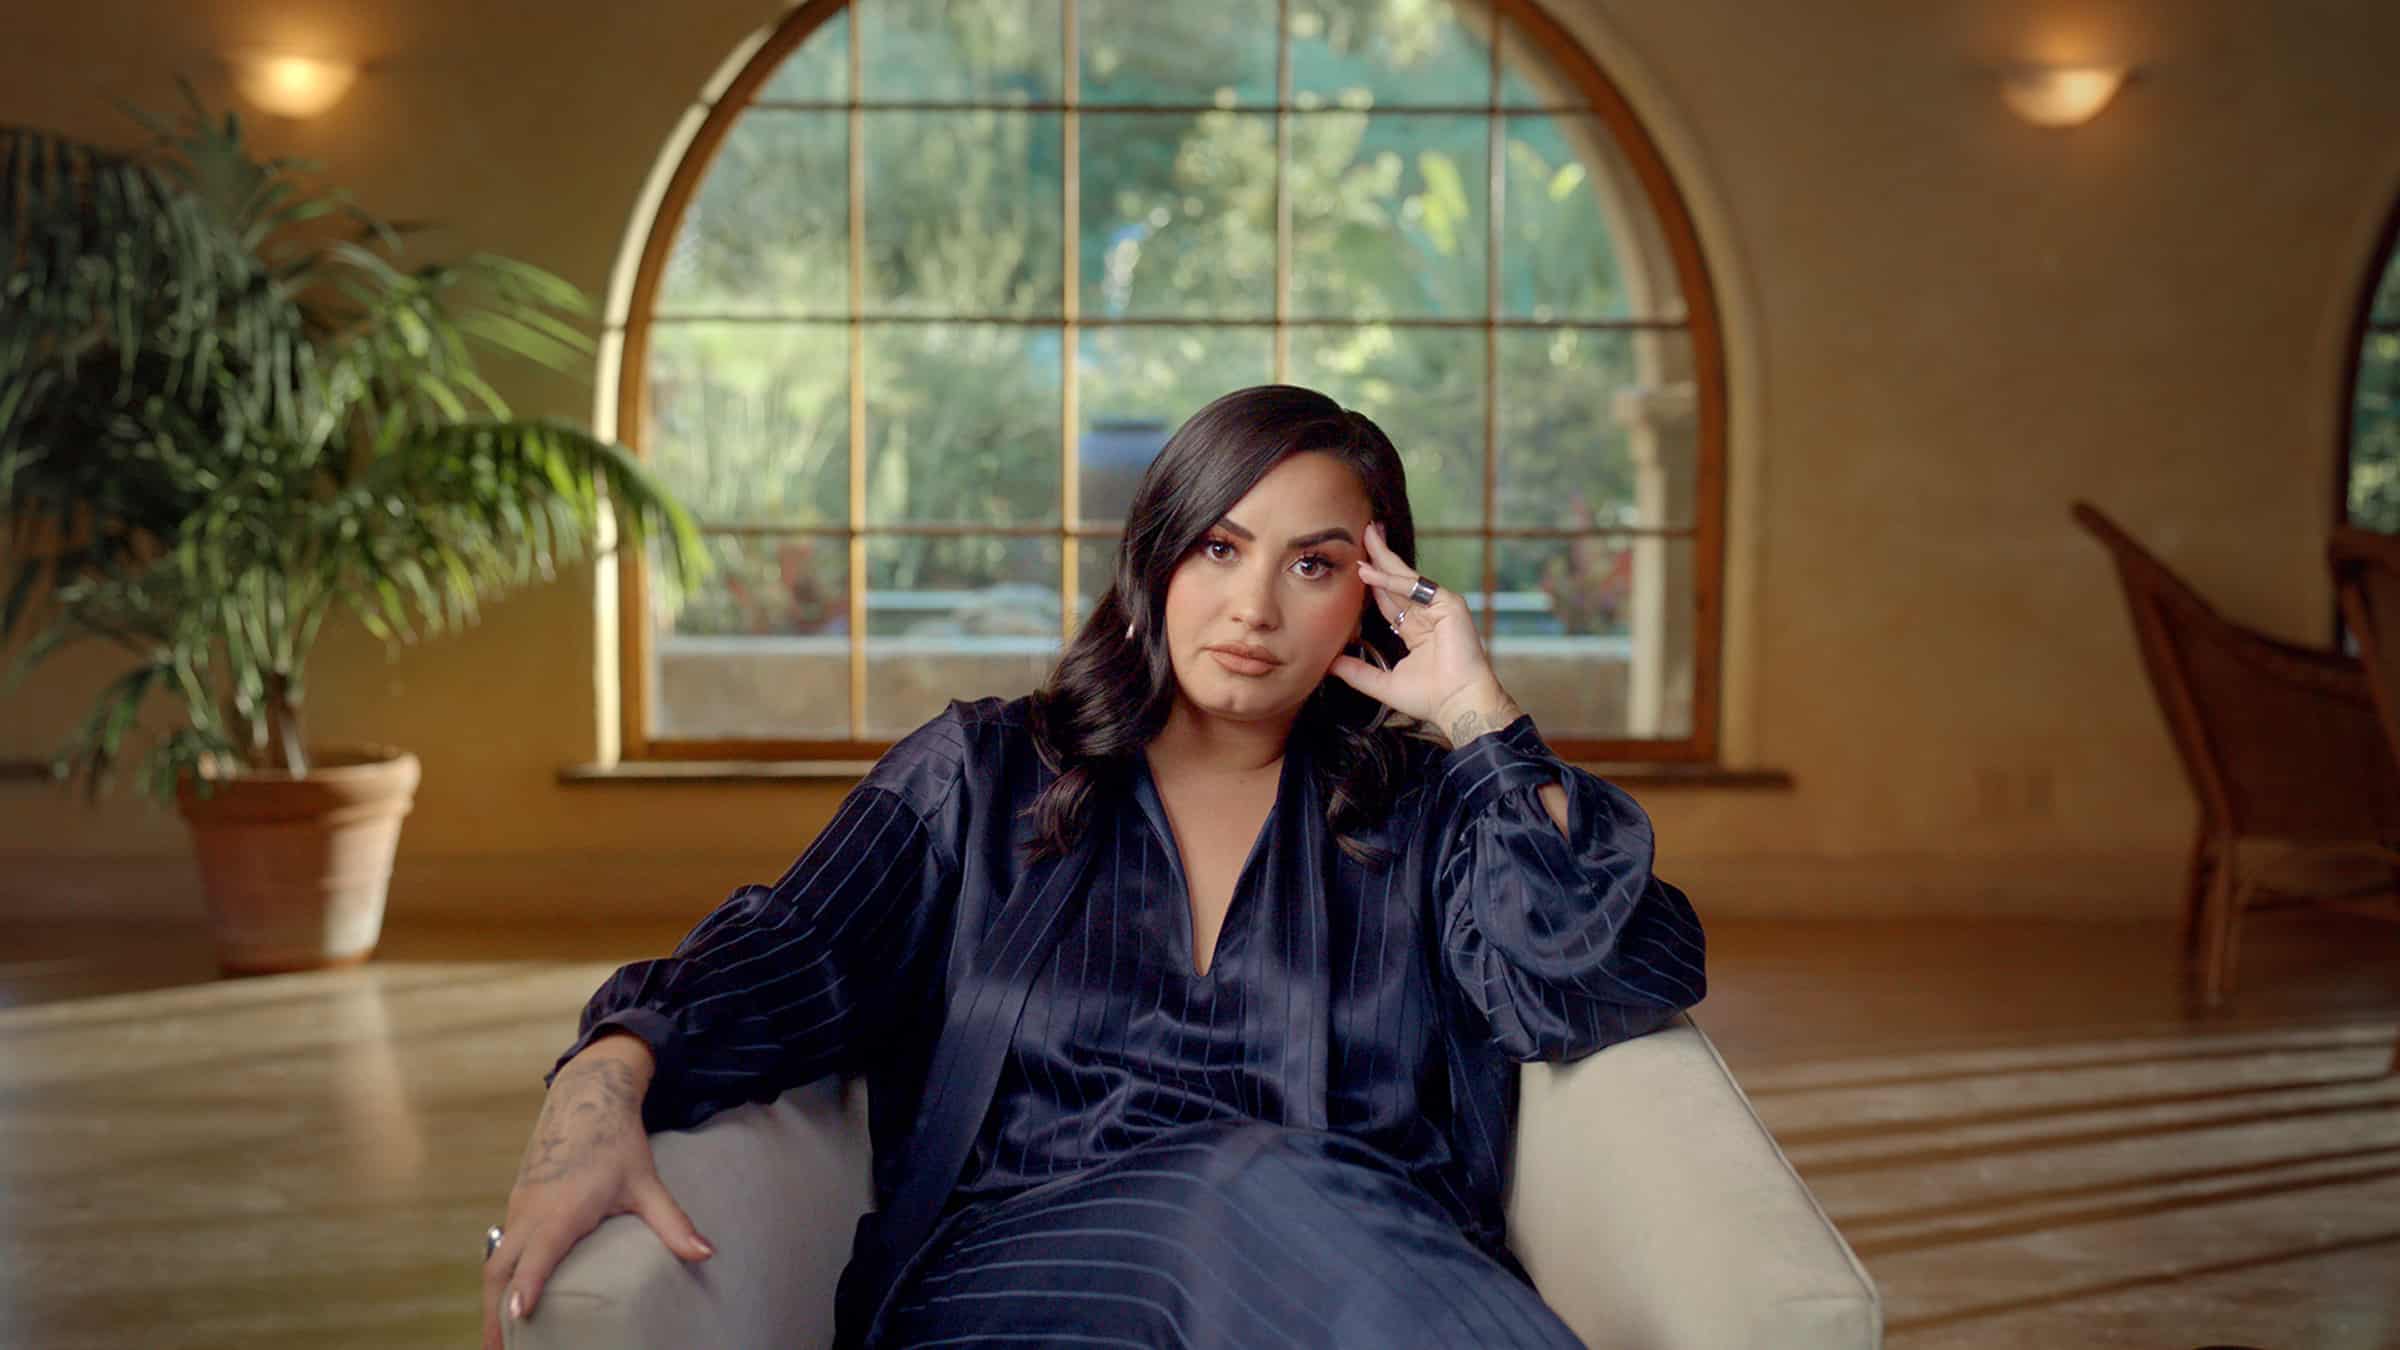 Demi Lovato Just Posted a Powerful Message About Her Relapse